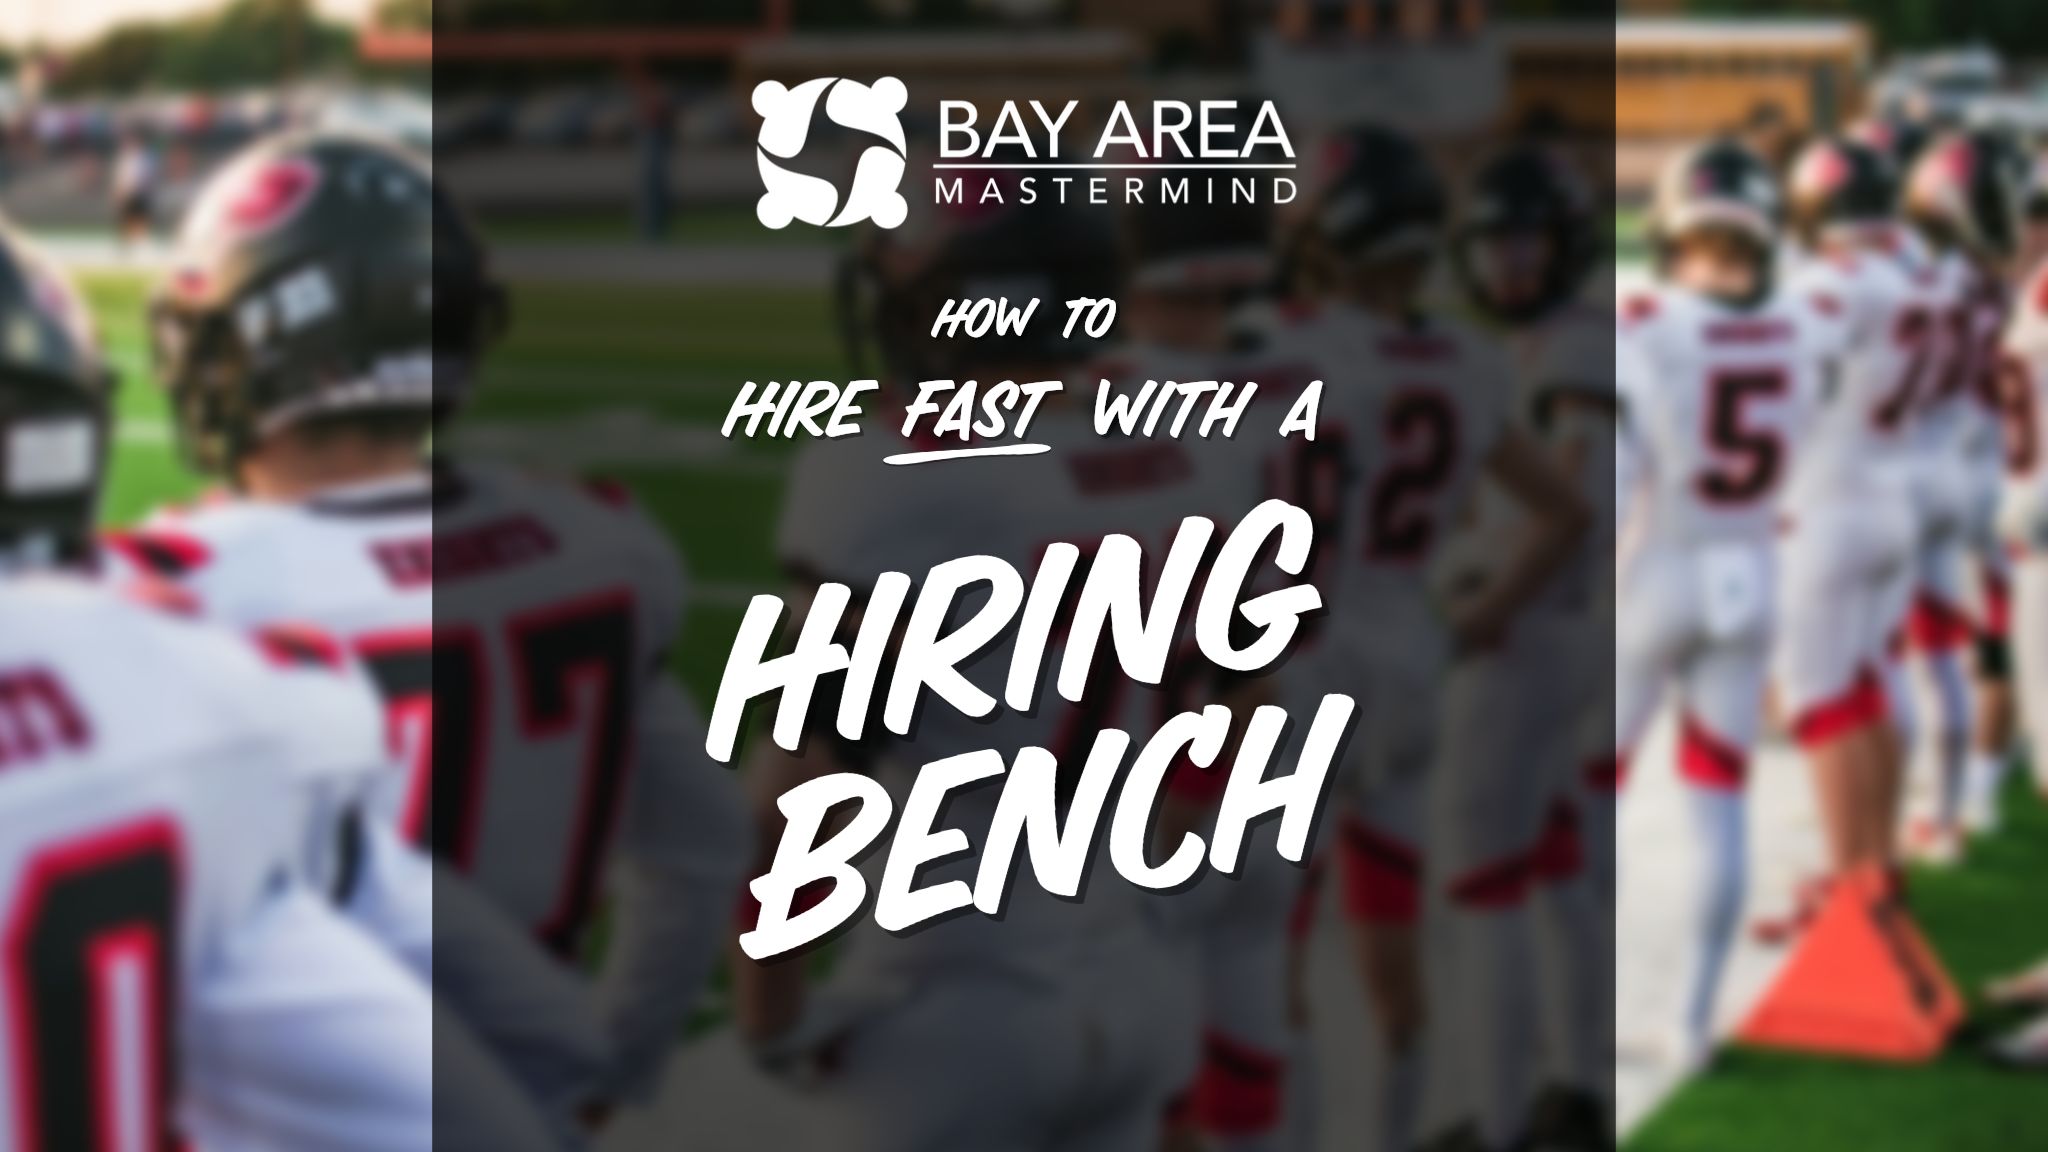 How to Hire FAST with a Hiring Bench